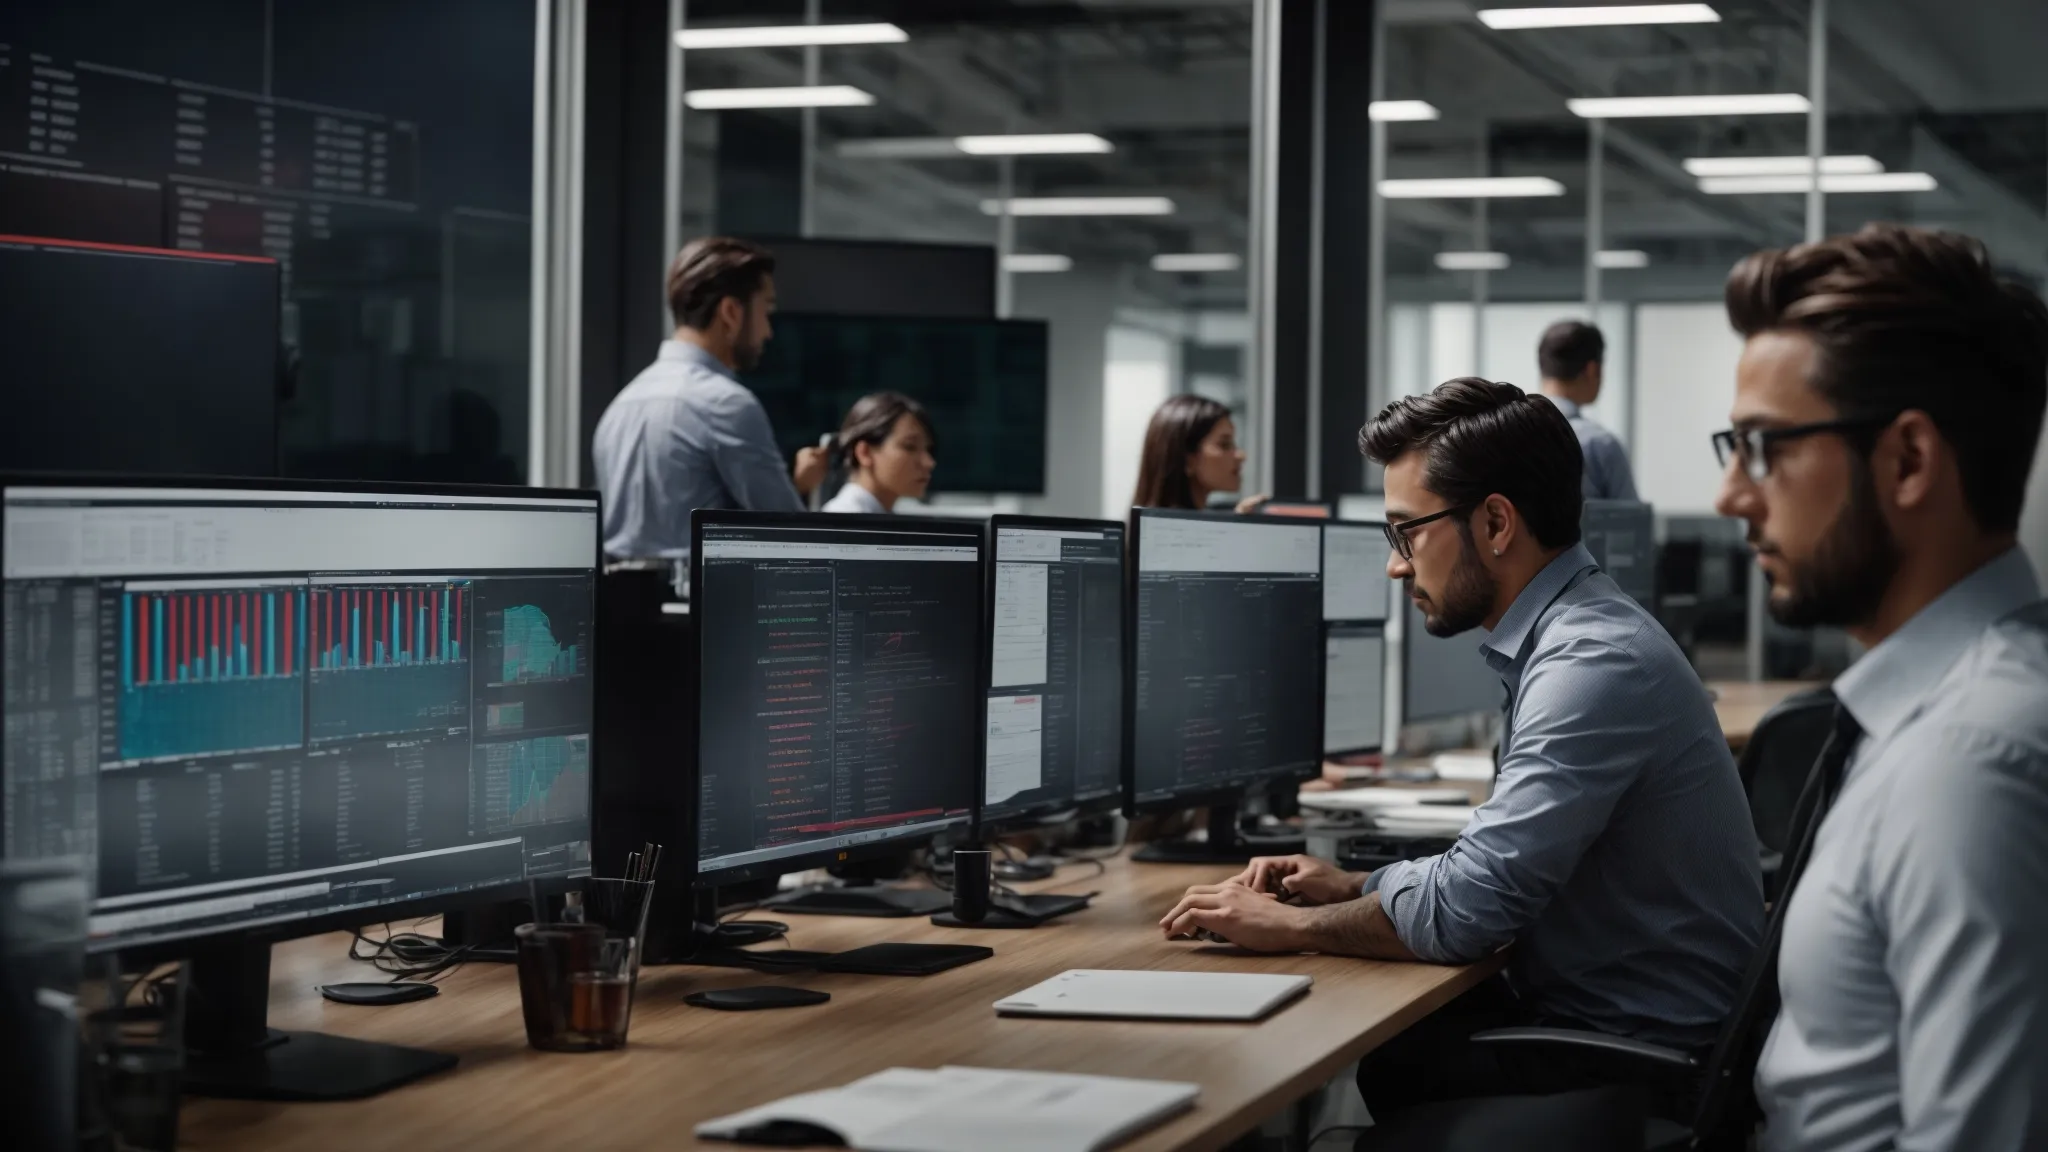 a bustling marketing team intently scrutinizes analytics dashboards on large monitors in a modern office environment.